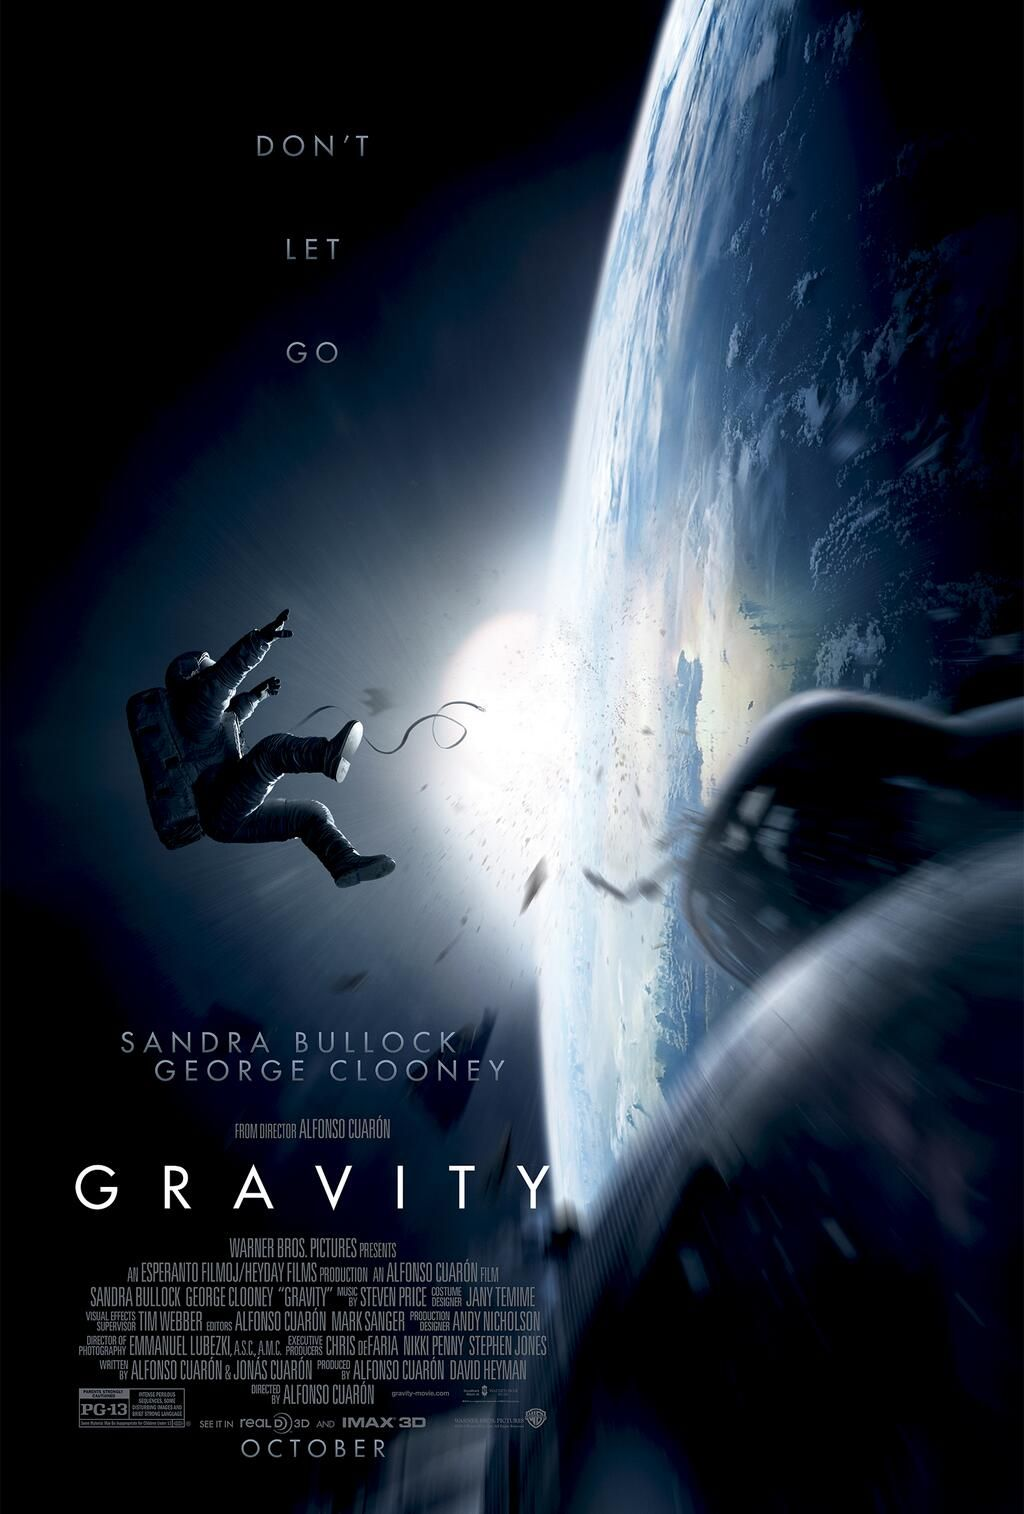 Gravity is a sci-fi thriller movie that you must watch